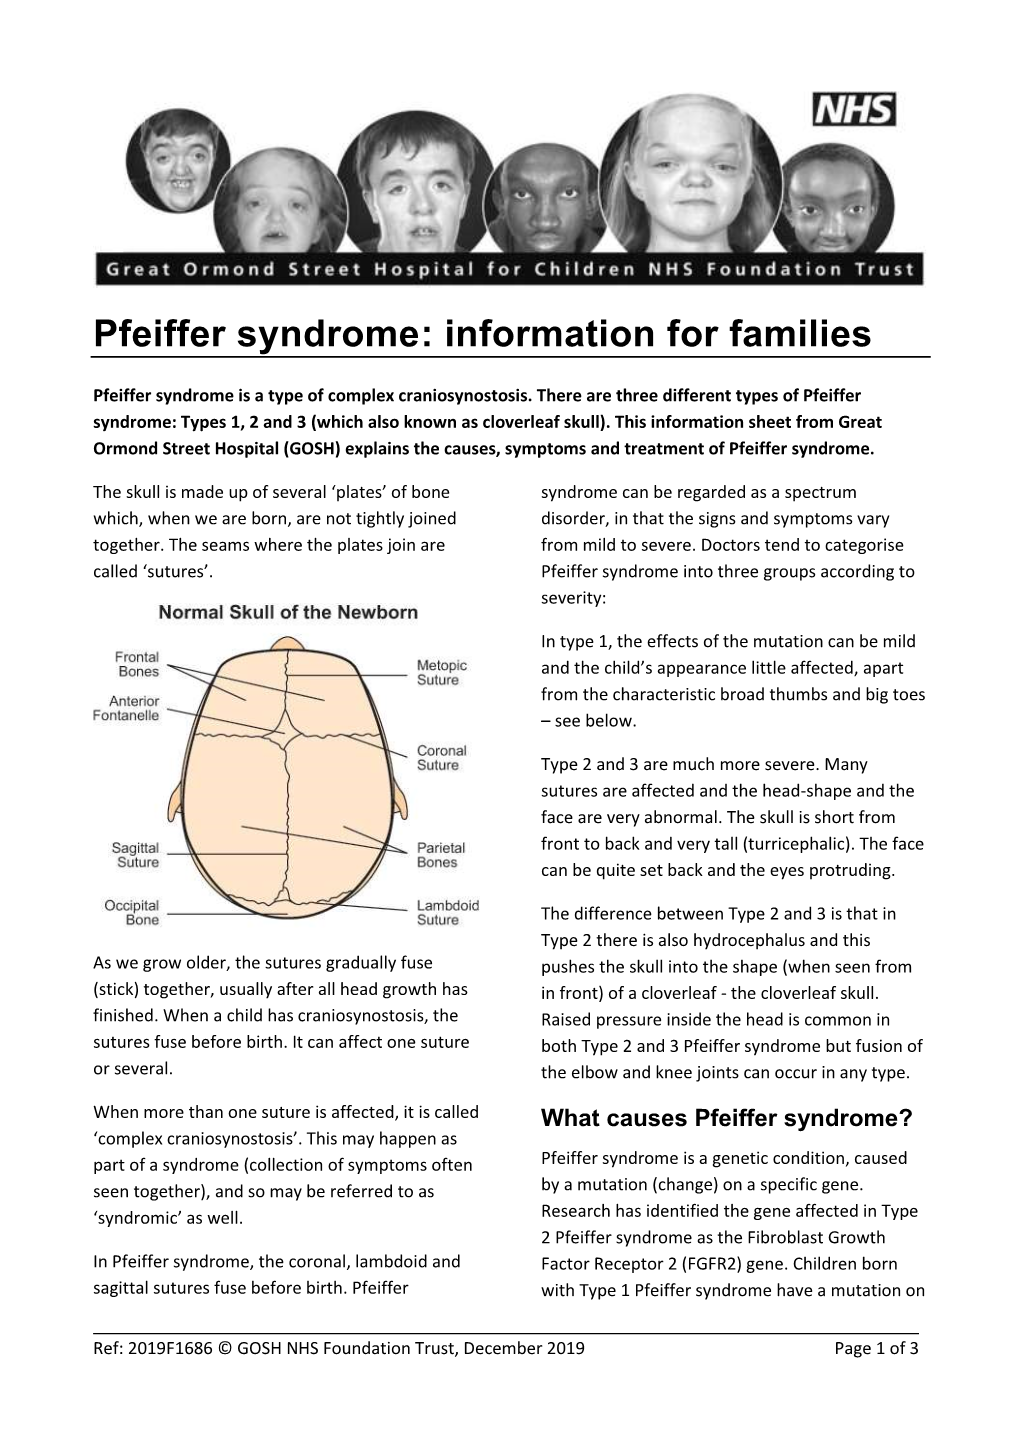 Pfeiffer Syndrome: Information for Families